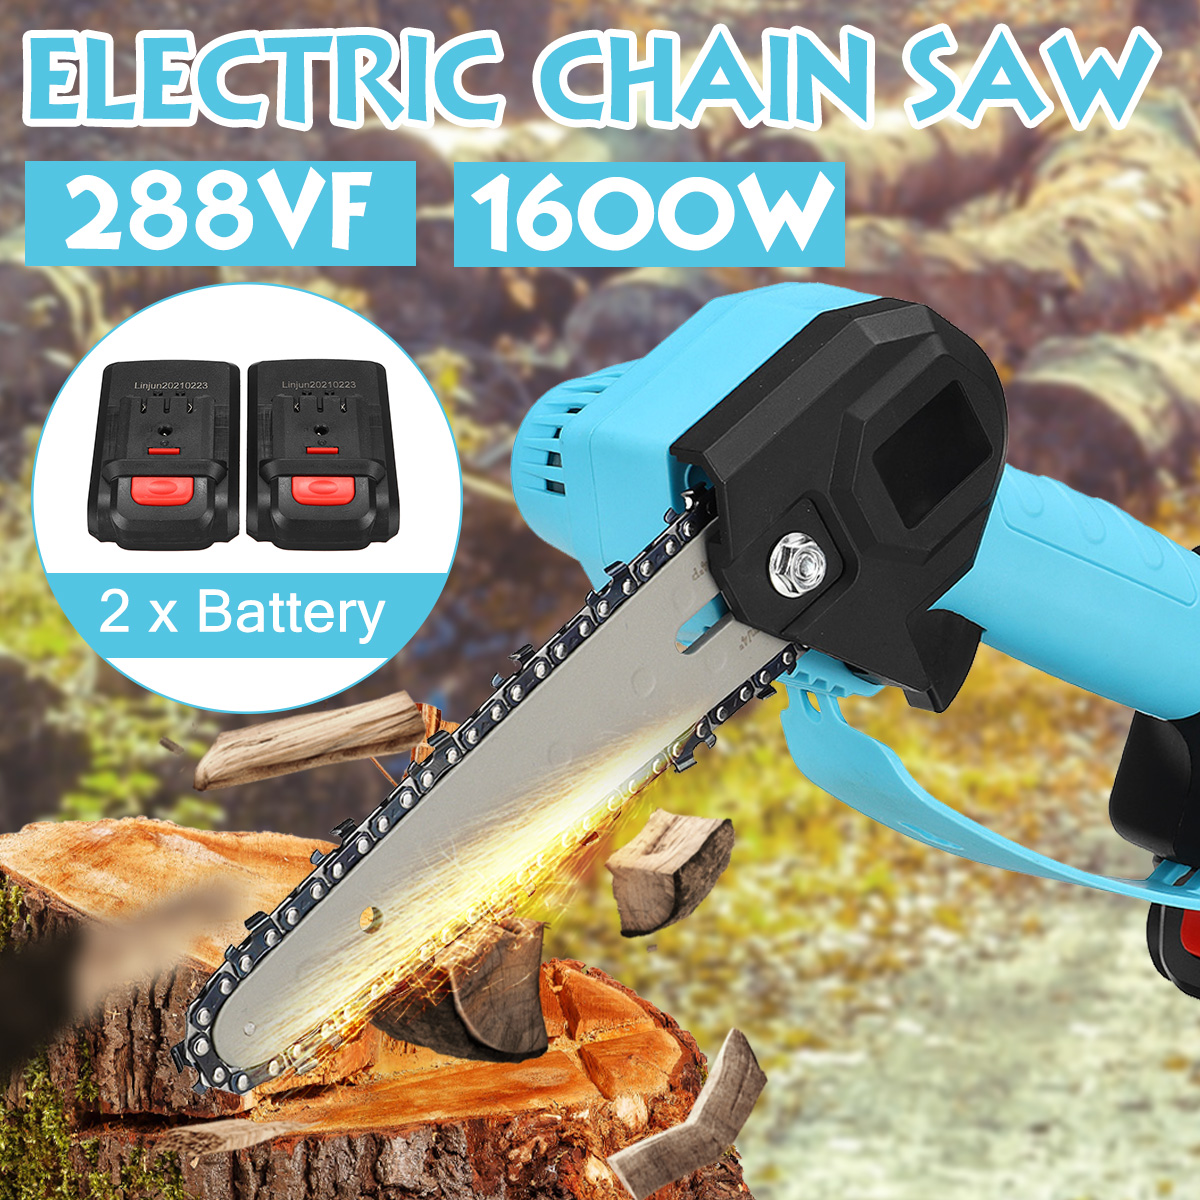 1600W-6Inch-24V-Rechargeable-Electric-Chain-Saw-Handheld-Mini-Chainsaw-Woodworking-Cutter-Tool-W-12p-1833049-2